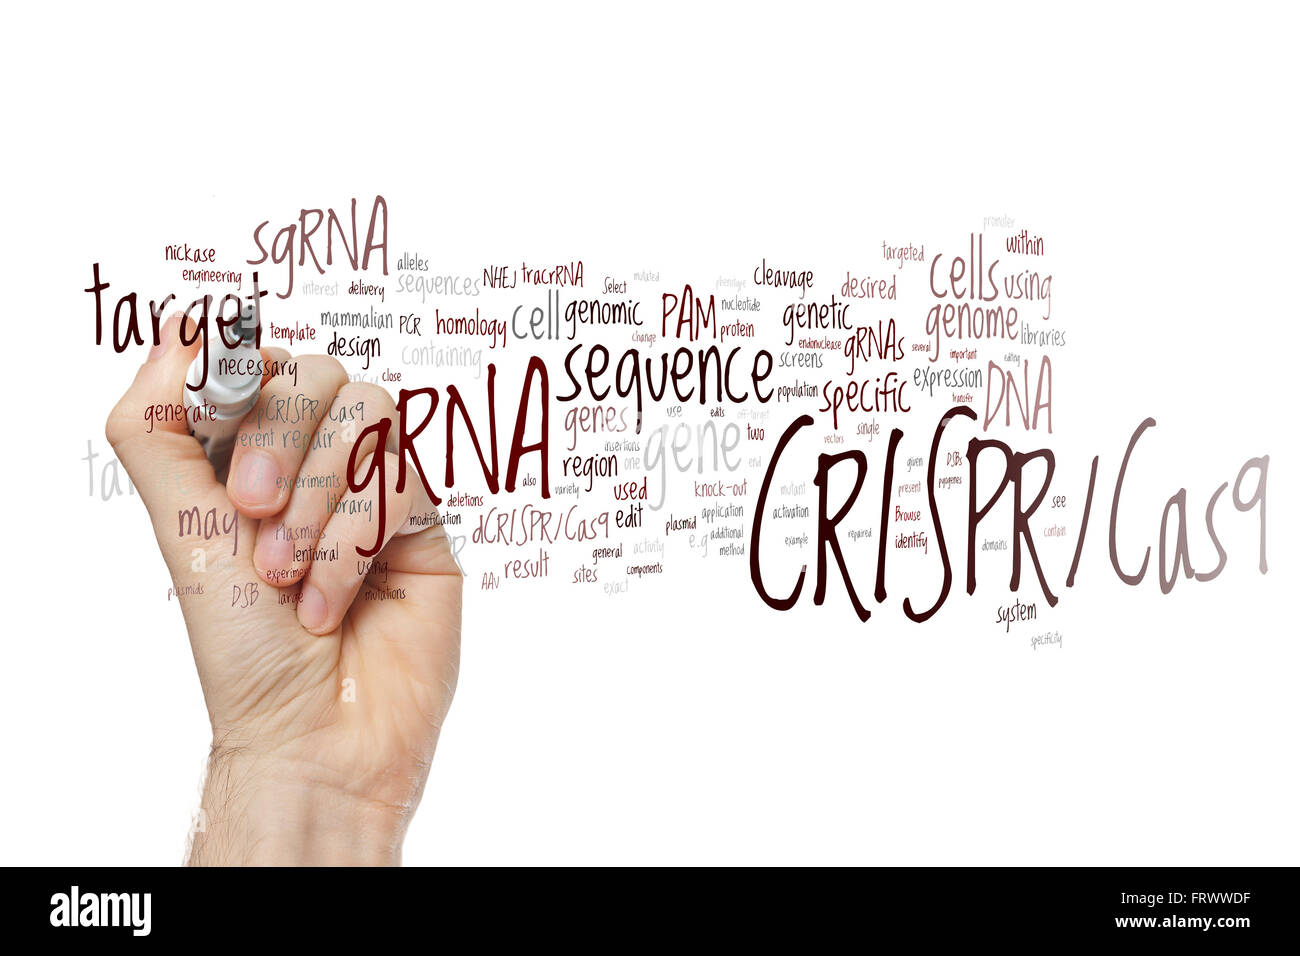 Hand writing CRISPR/Cas9 system for editing, regulating and targeting genomes (biotechnology and genetic engineering) word cloud Stock Photo